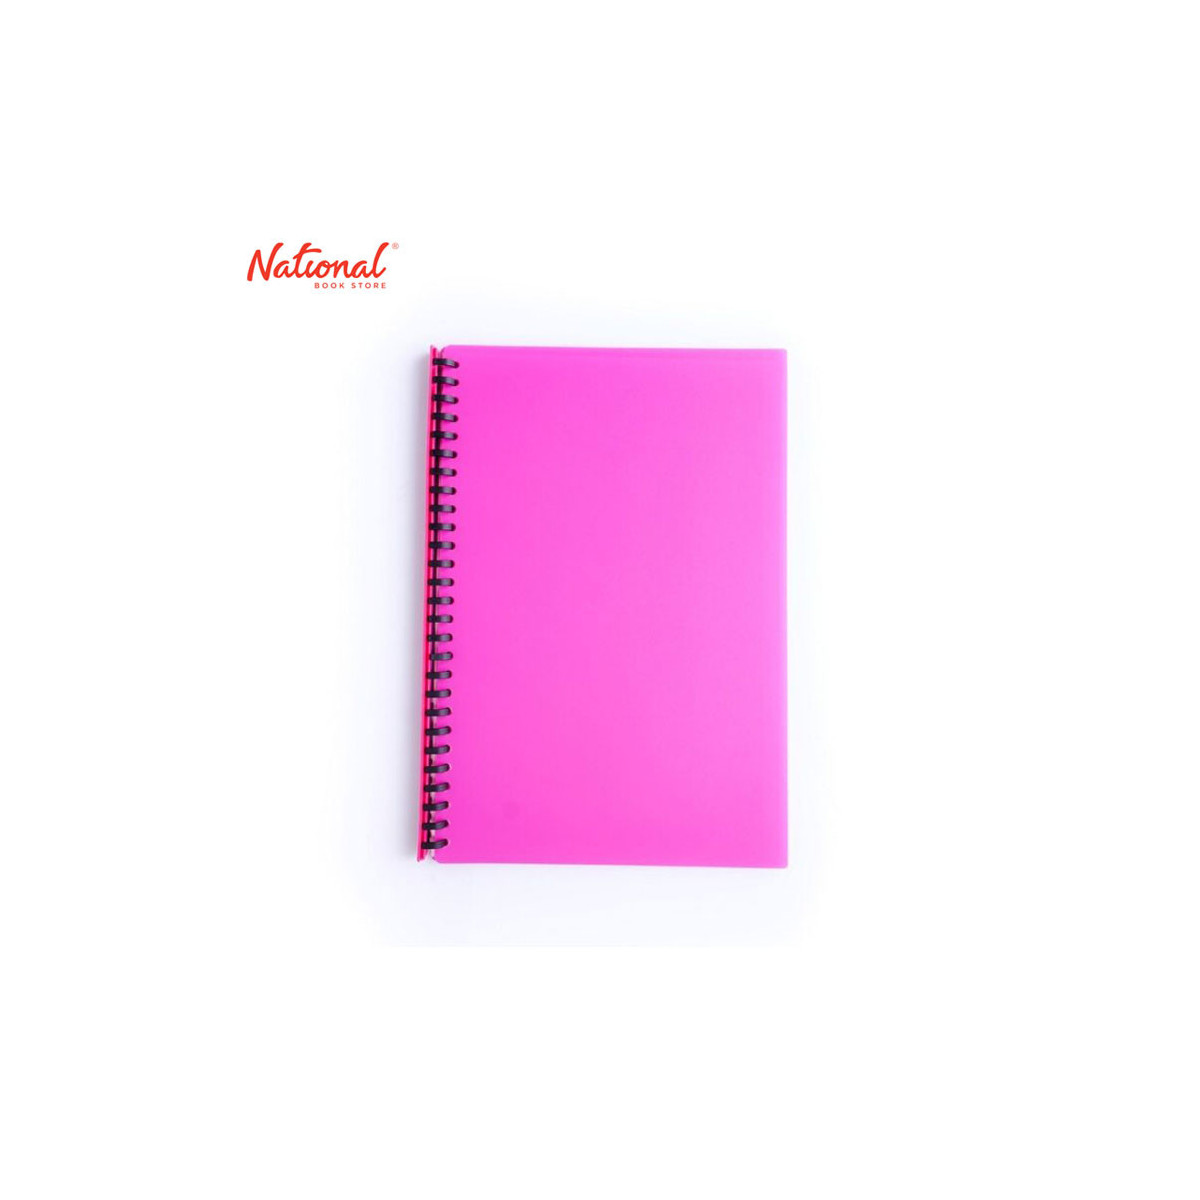 EVO CLEARBOOK REFILLABLE LONG 20SHEETS 27HOLES NEON PINK